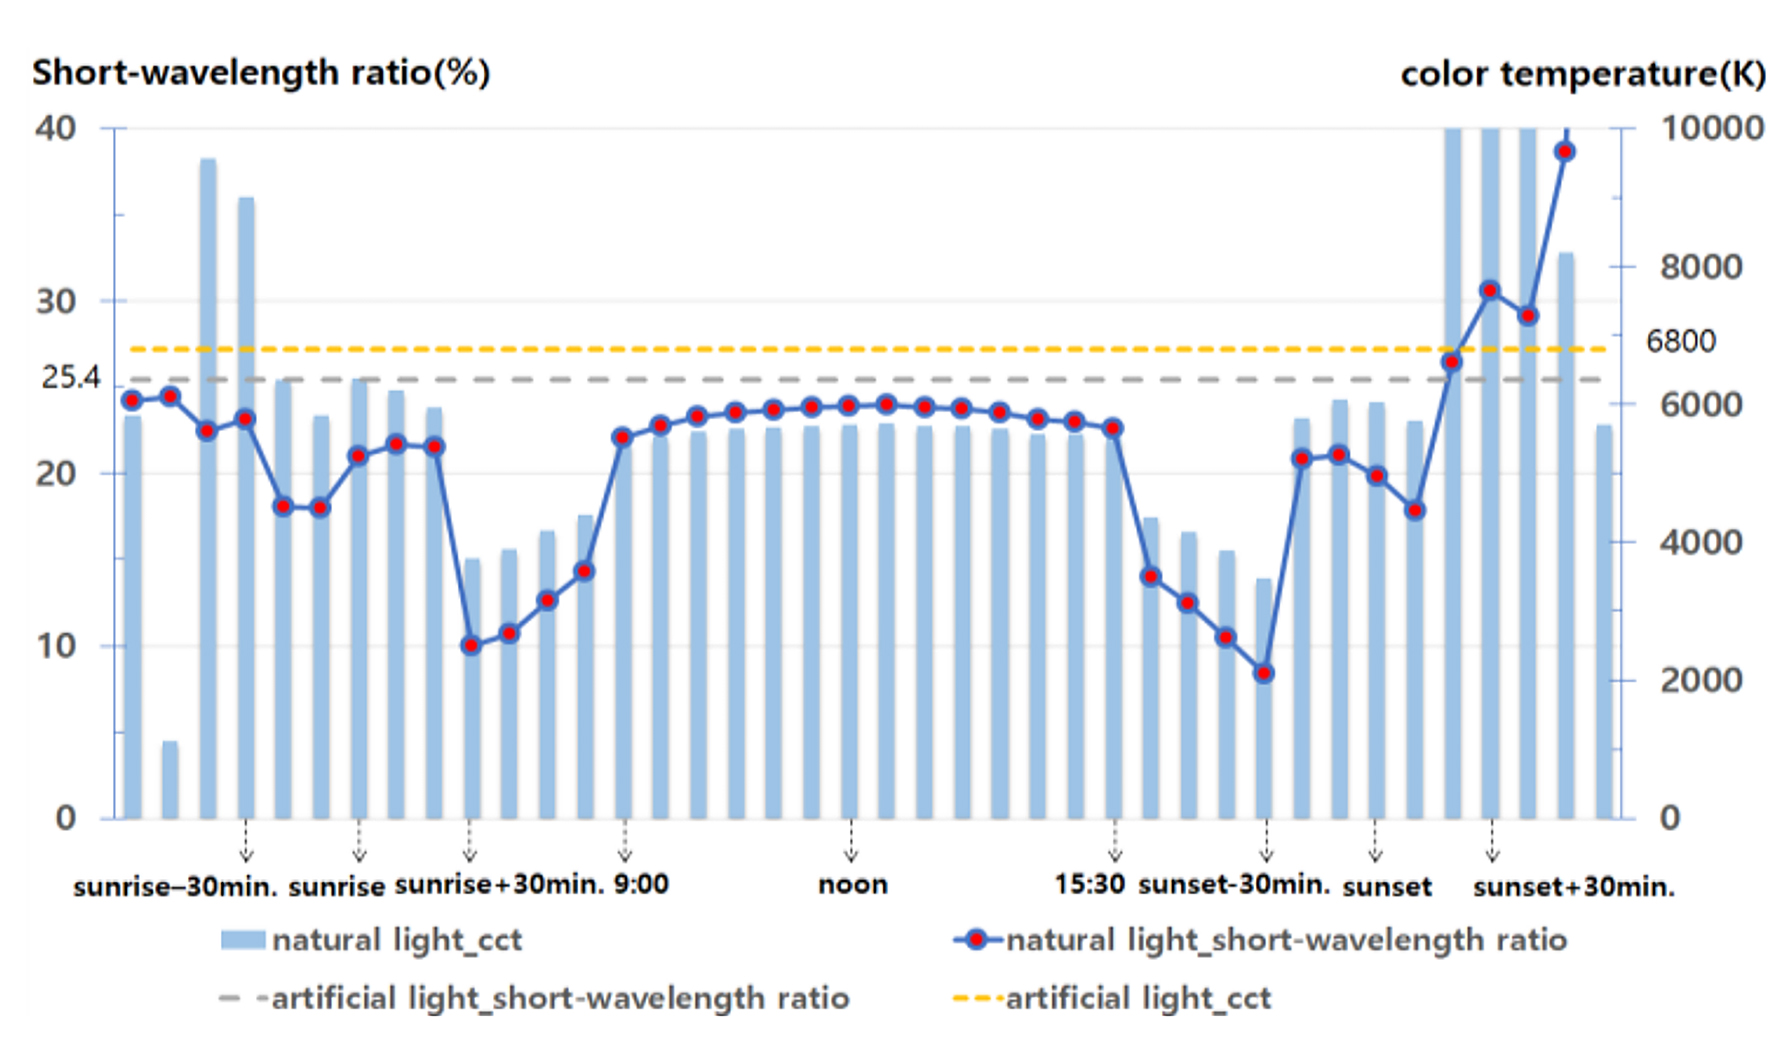 Graph showing short-wavelength ratio and effective CCT of natural light through the day in Korea.